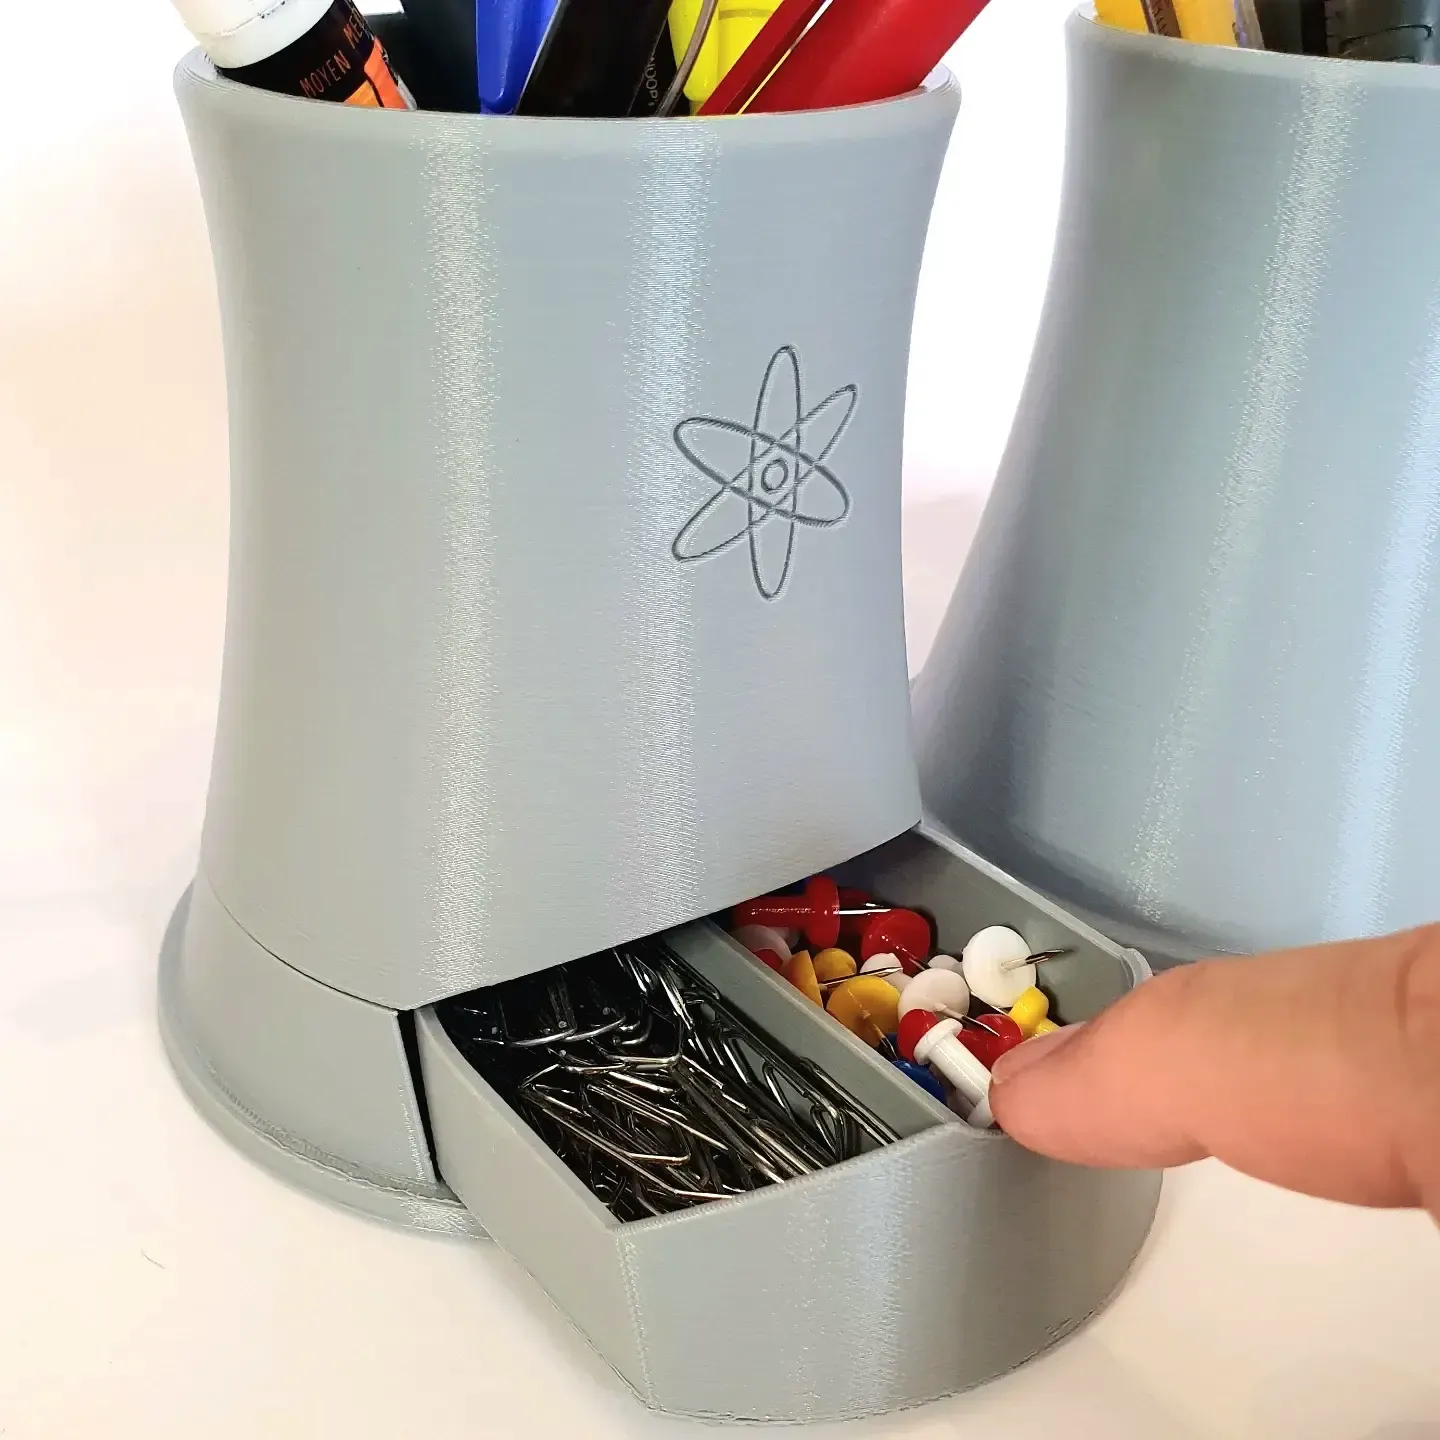 Simpsons Nuclear Plant vase, pencil and toothbrush holder